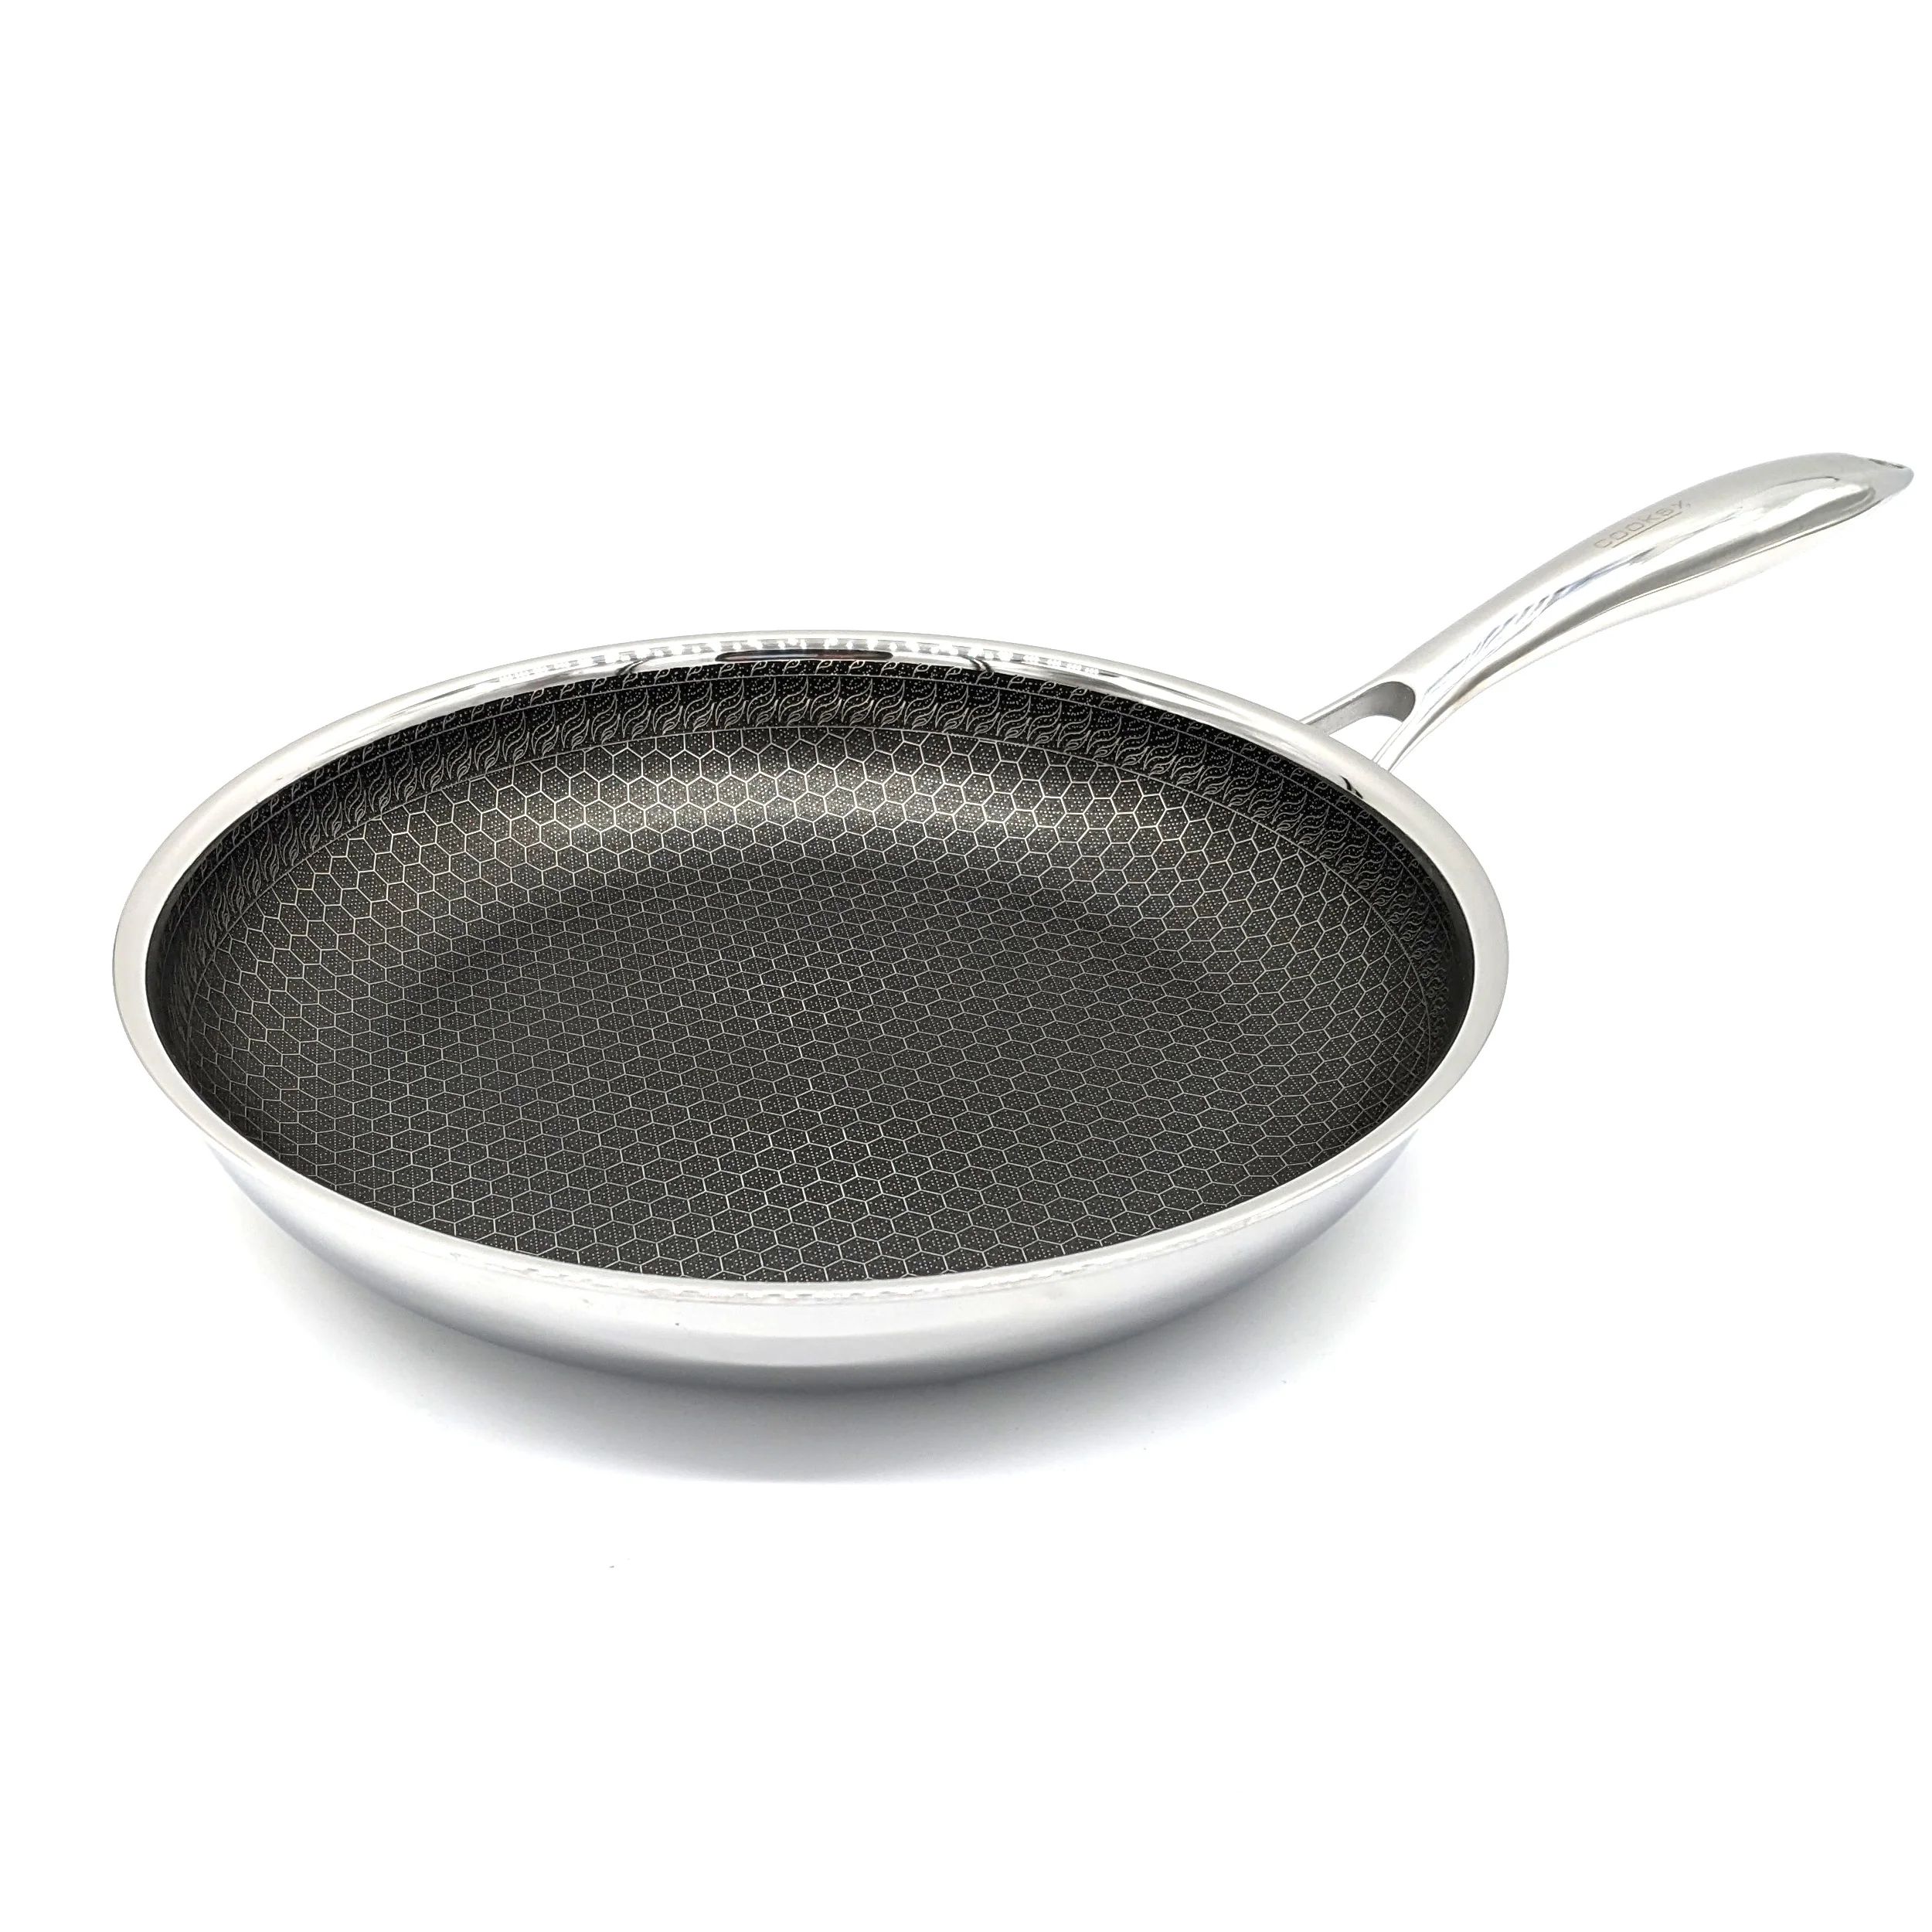 Cooksy 11 inch Stainless Nonstick Hybrid Fry Pan | Cooksy